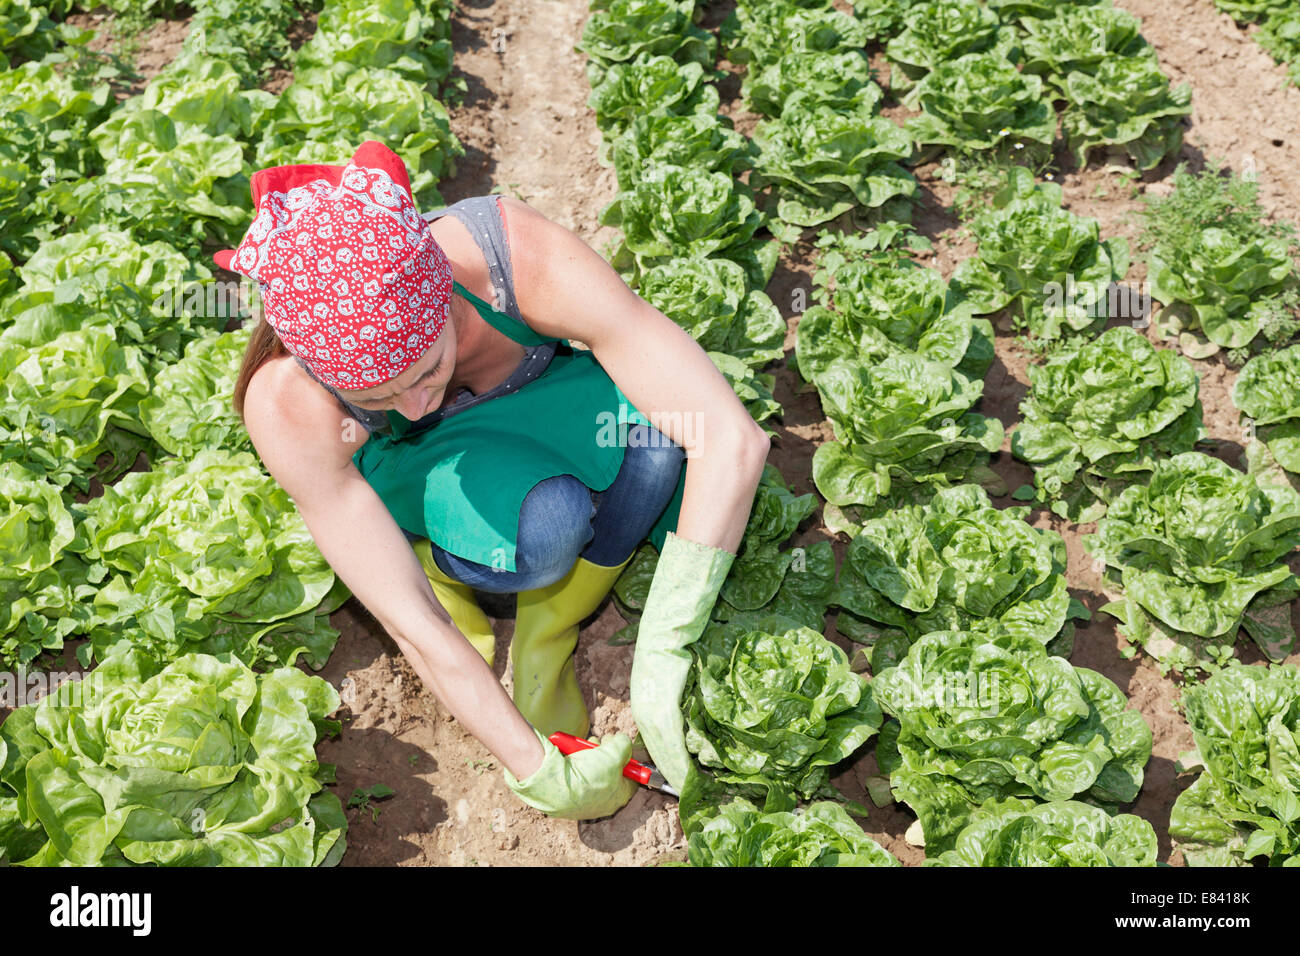 Young woman harvesting lettuce on a field, Baden-Württemberg, Germany Stock Photo